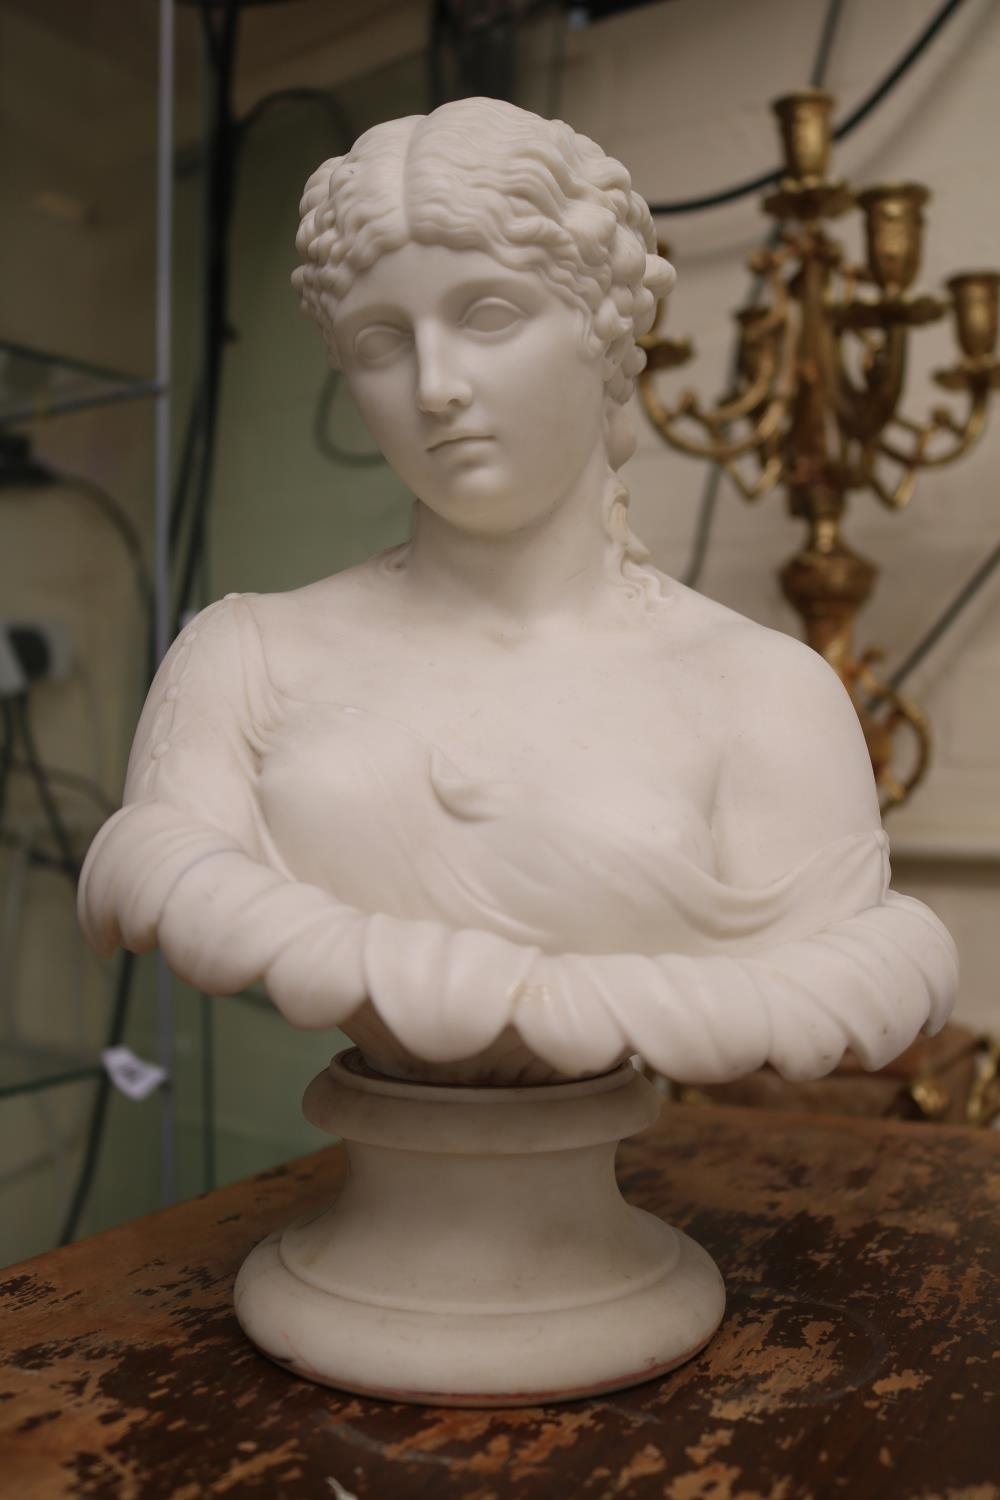 19thC Parian Bust of Clytie the water Nymph from Greek Mythology. 28cm in Height